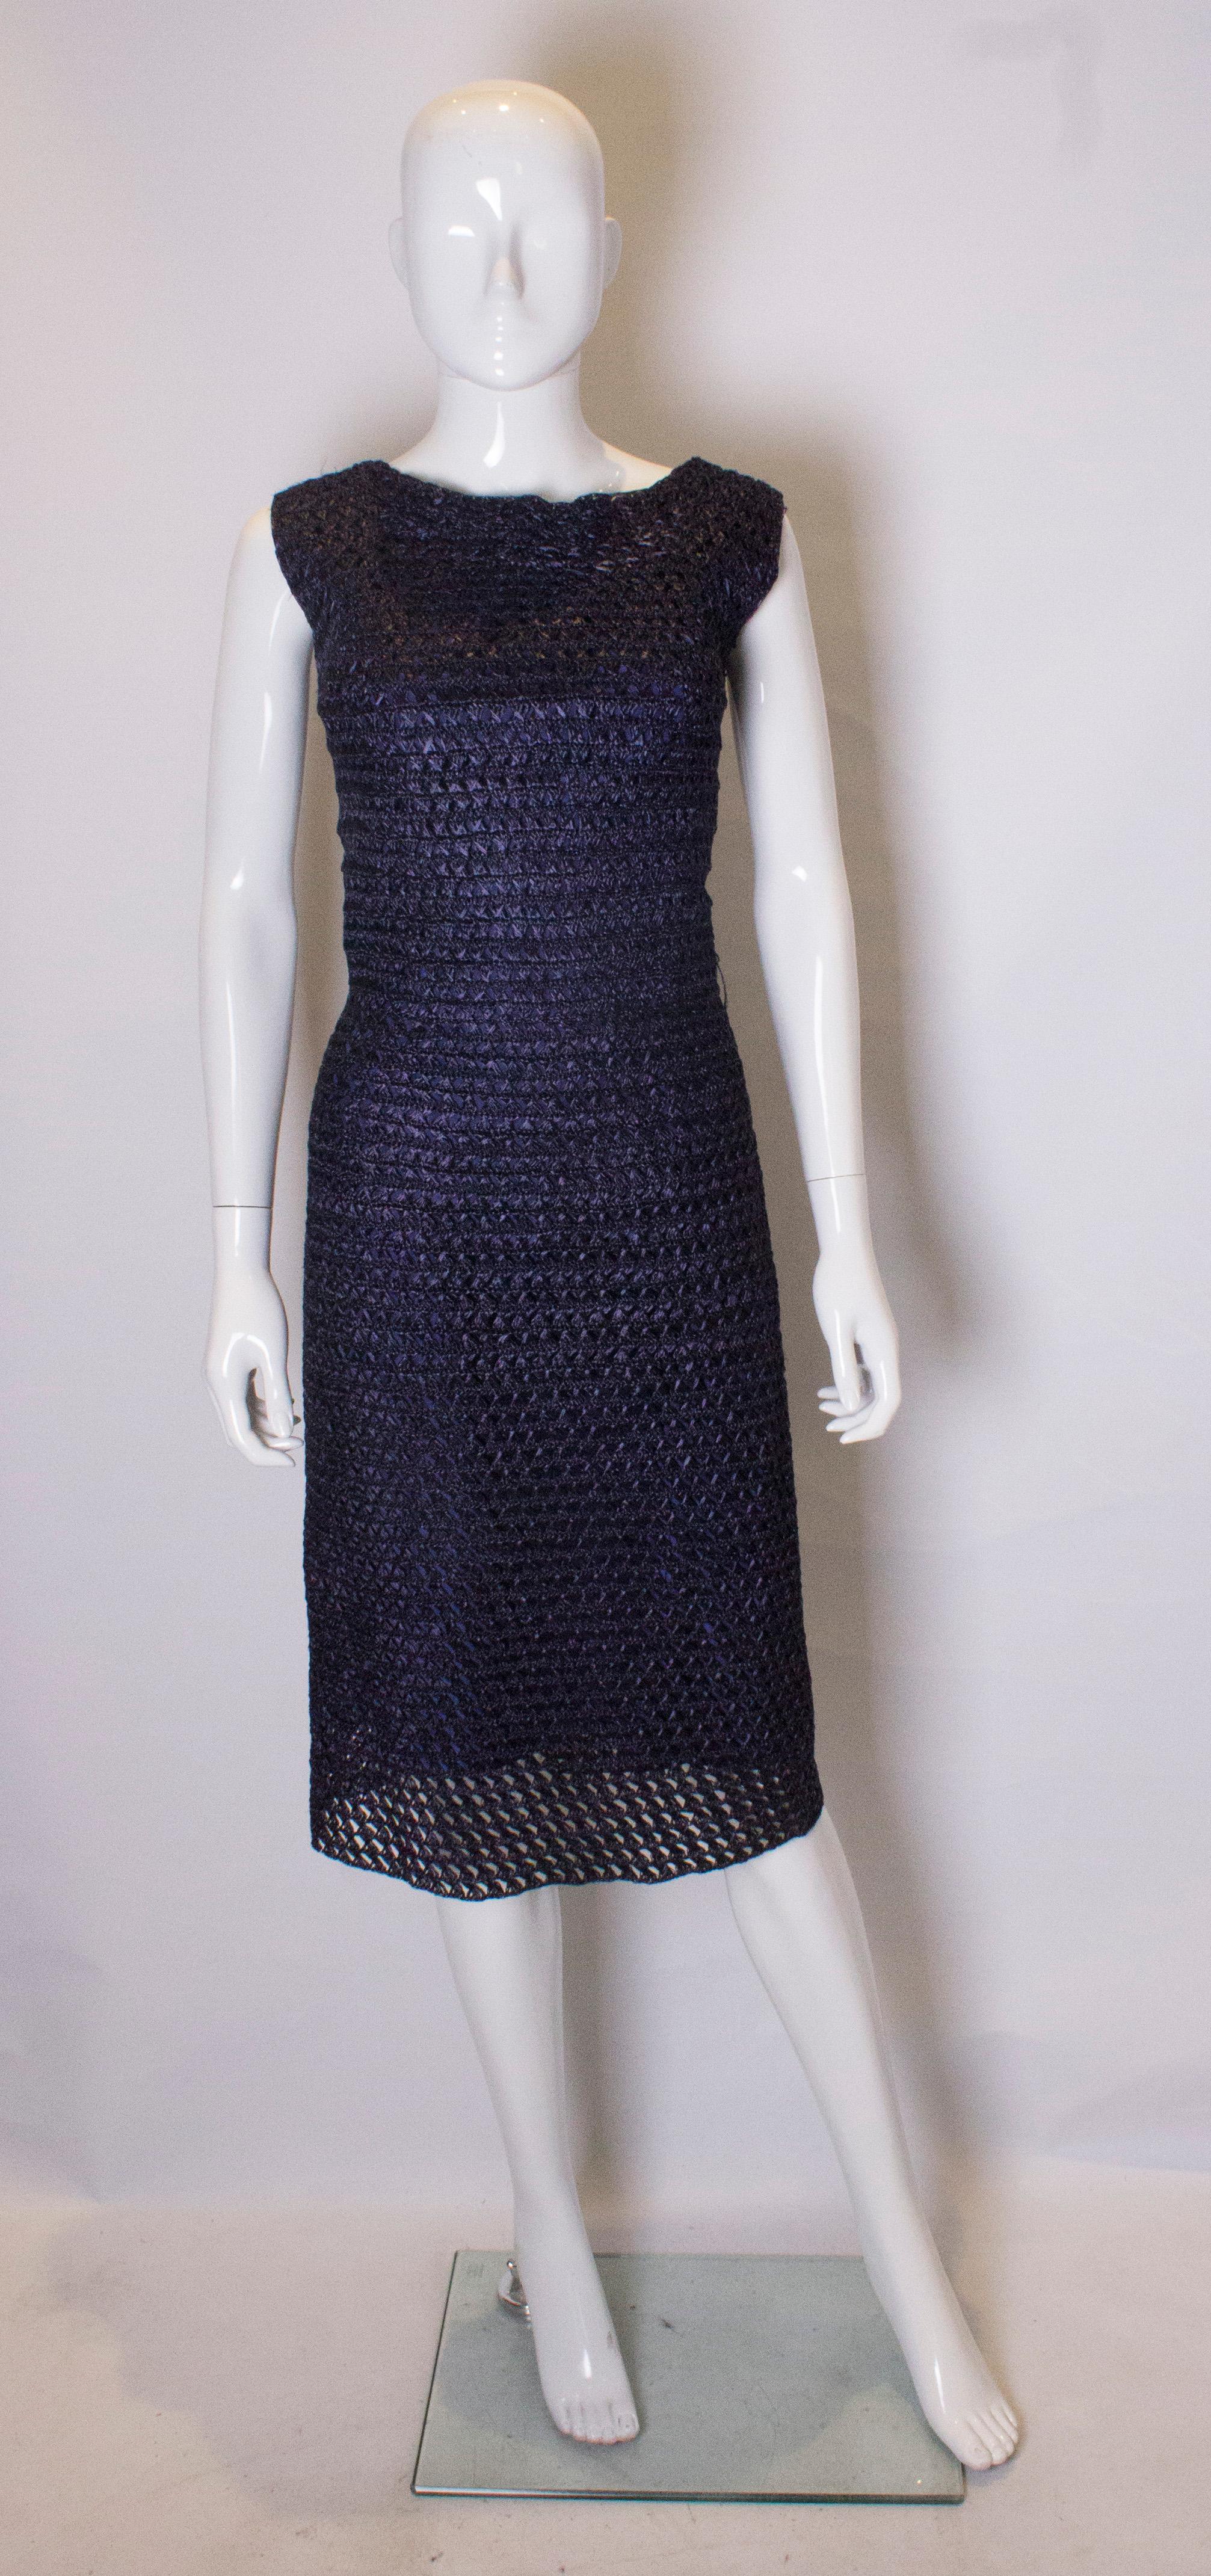 1950's Extreme Hourglass Woven Navy Blue Raffia Calf Length Cocktail Wiggle Dress  Size Small/Medium

This drop dead gorgeous dress is so flawlessly designed and beautifully executed. The dress is entirely lined and fashioned from beautiful supple